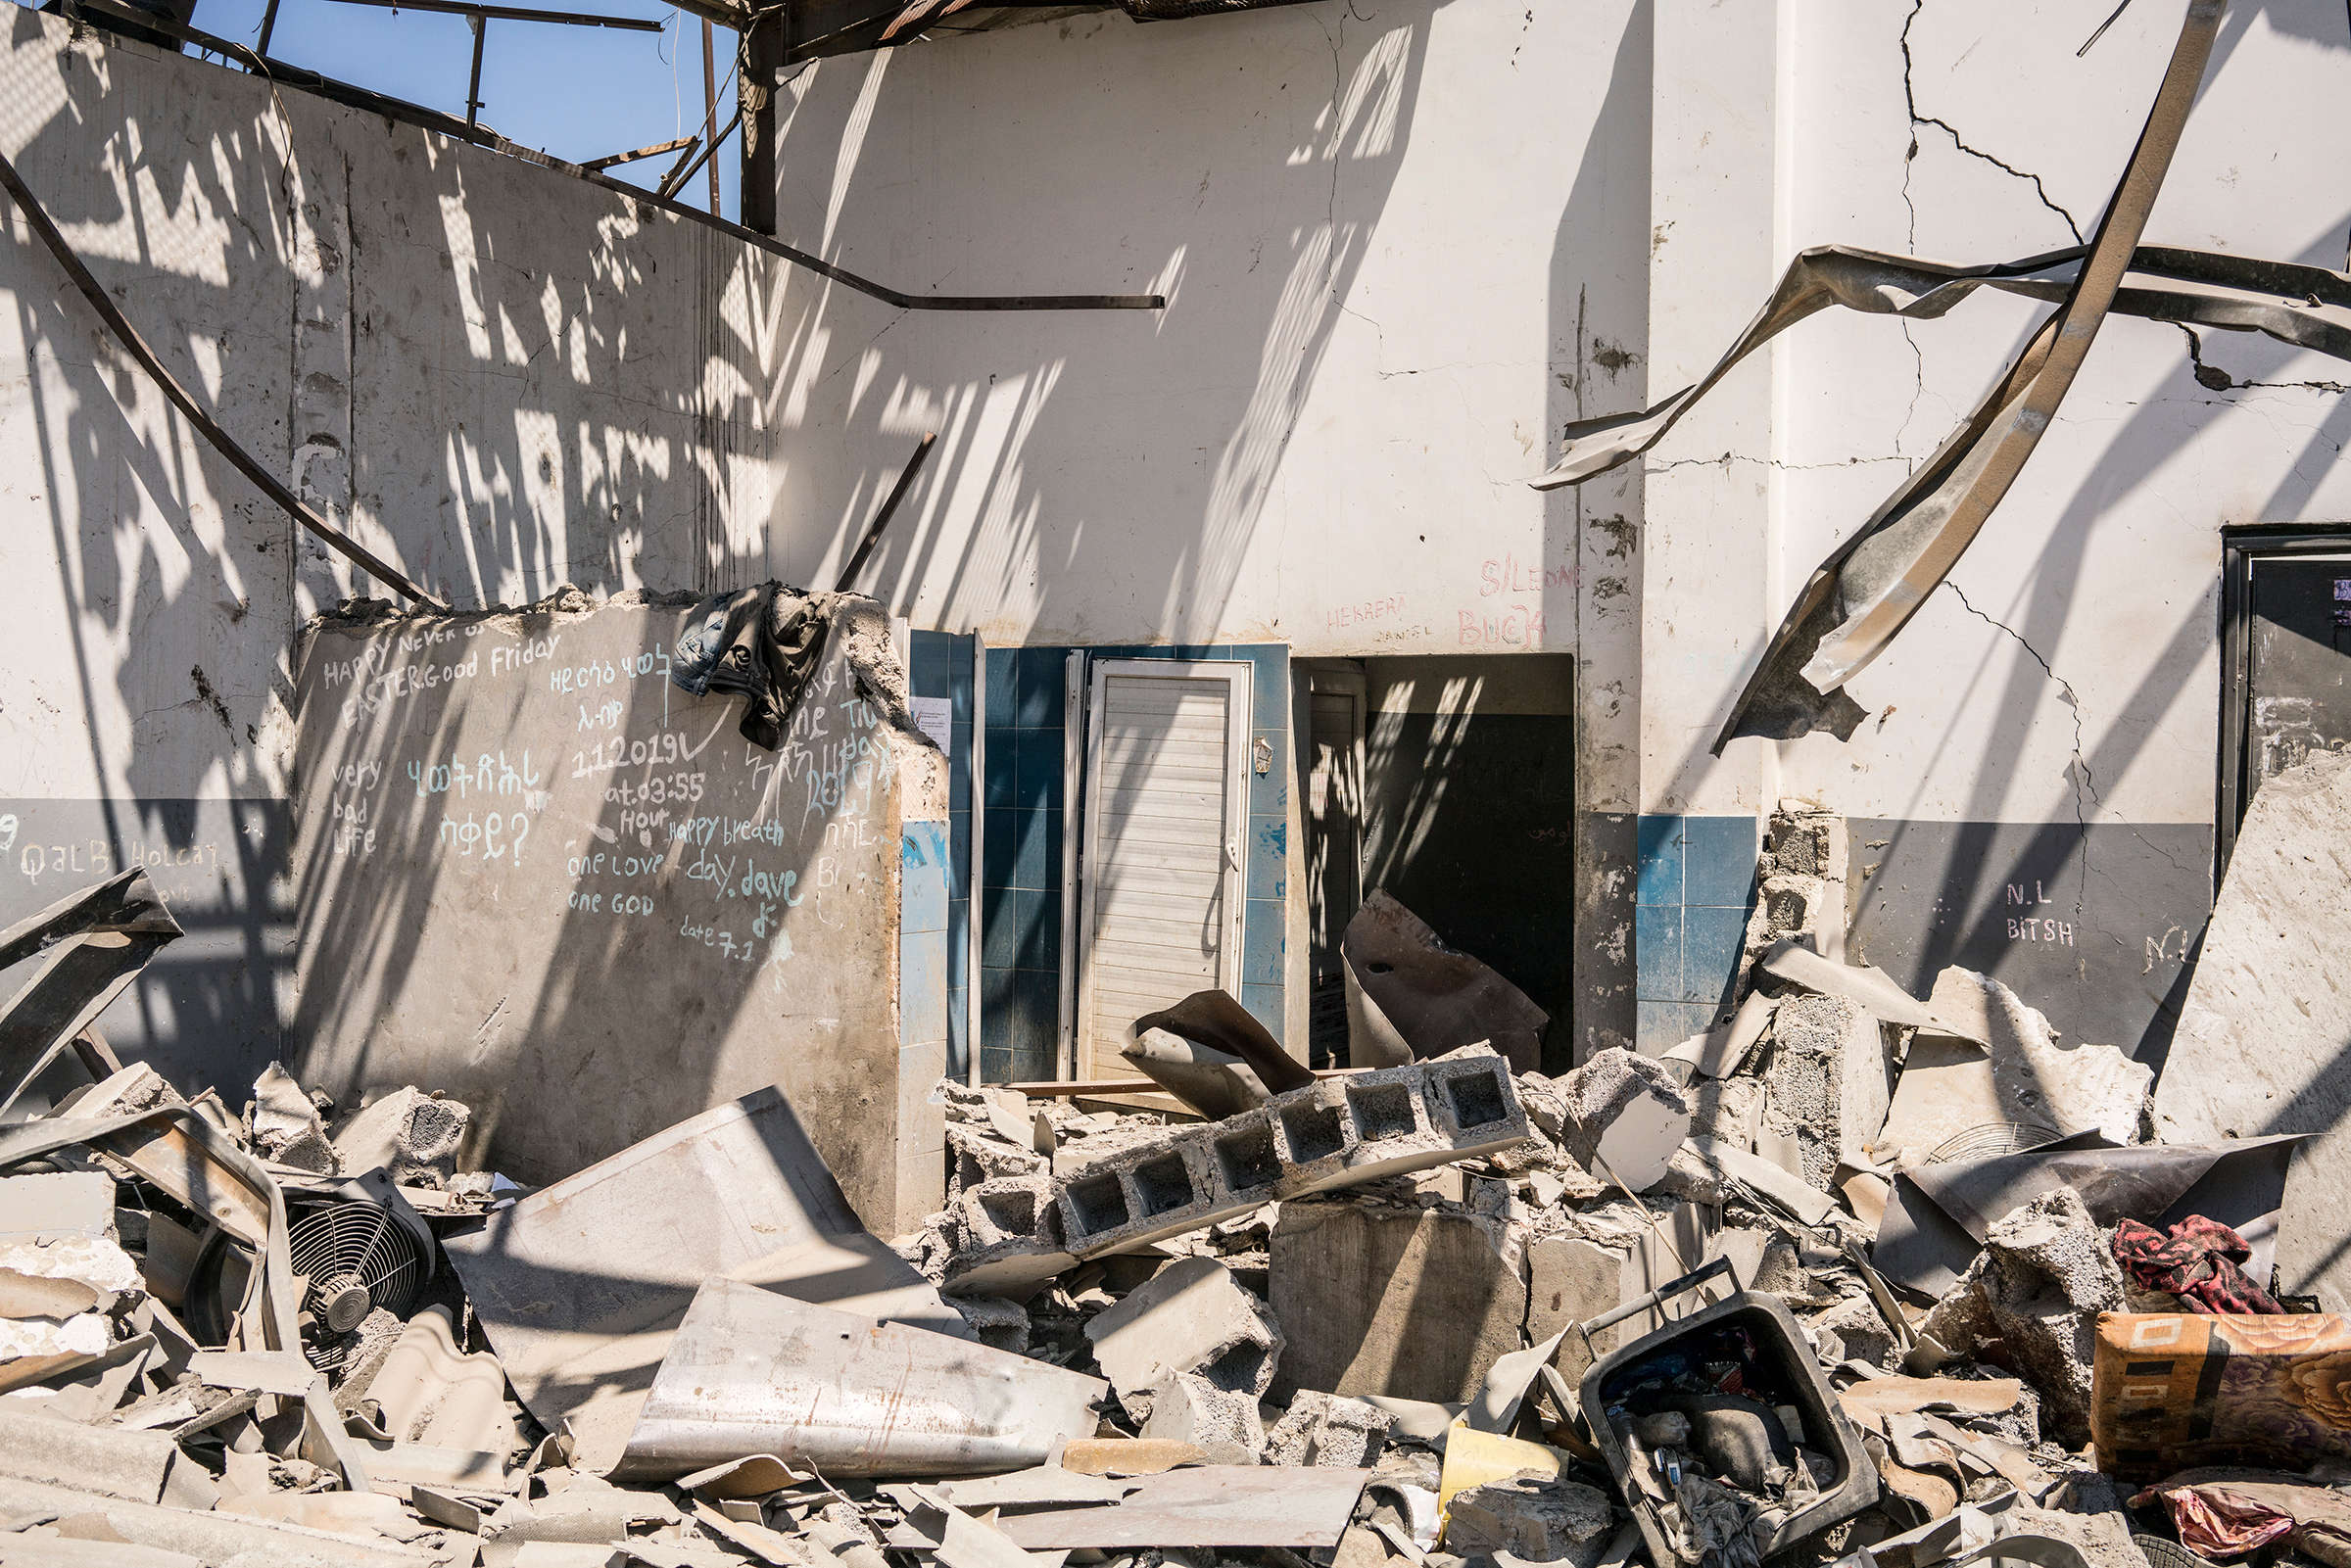 A section of the detention center that was turned to rubble. (Emanuele Satolli)